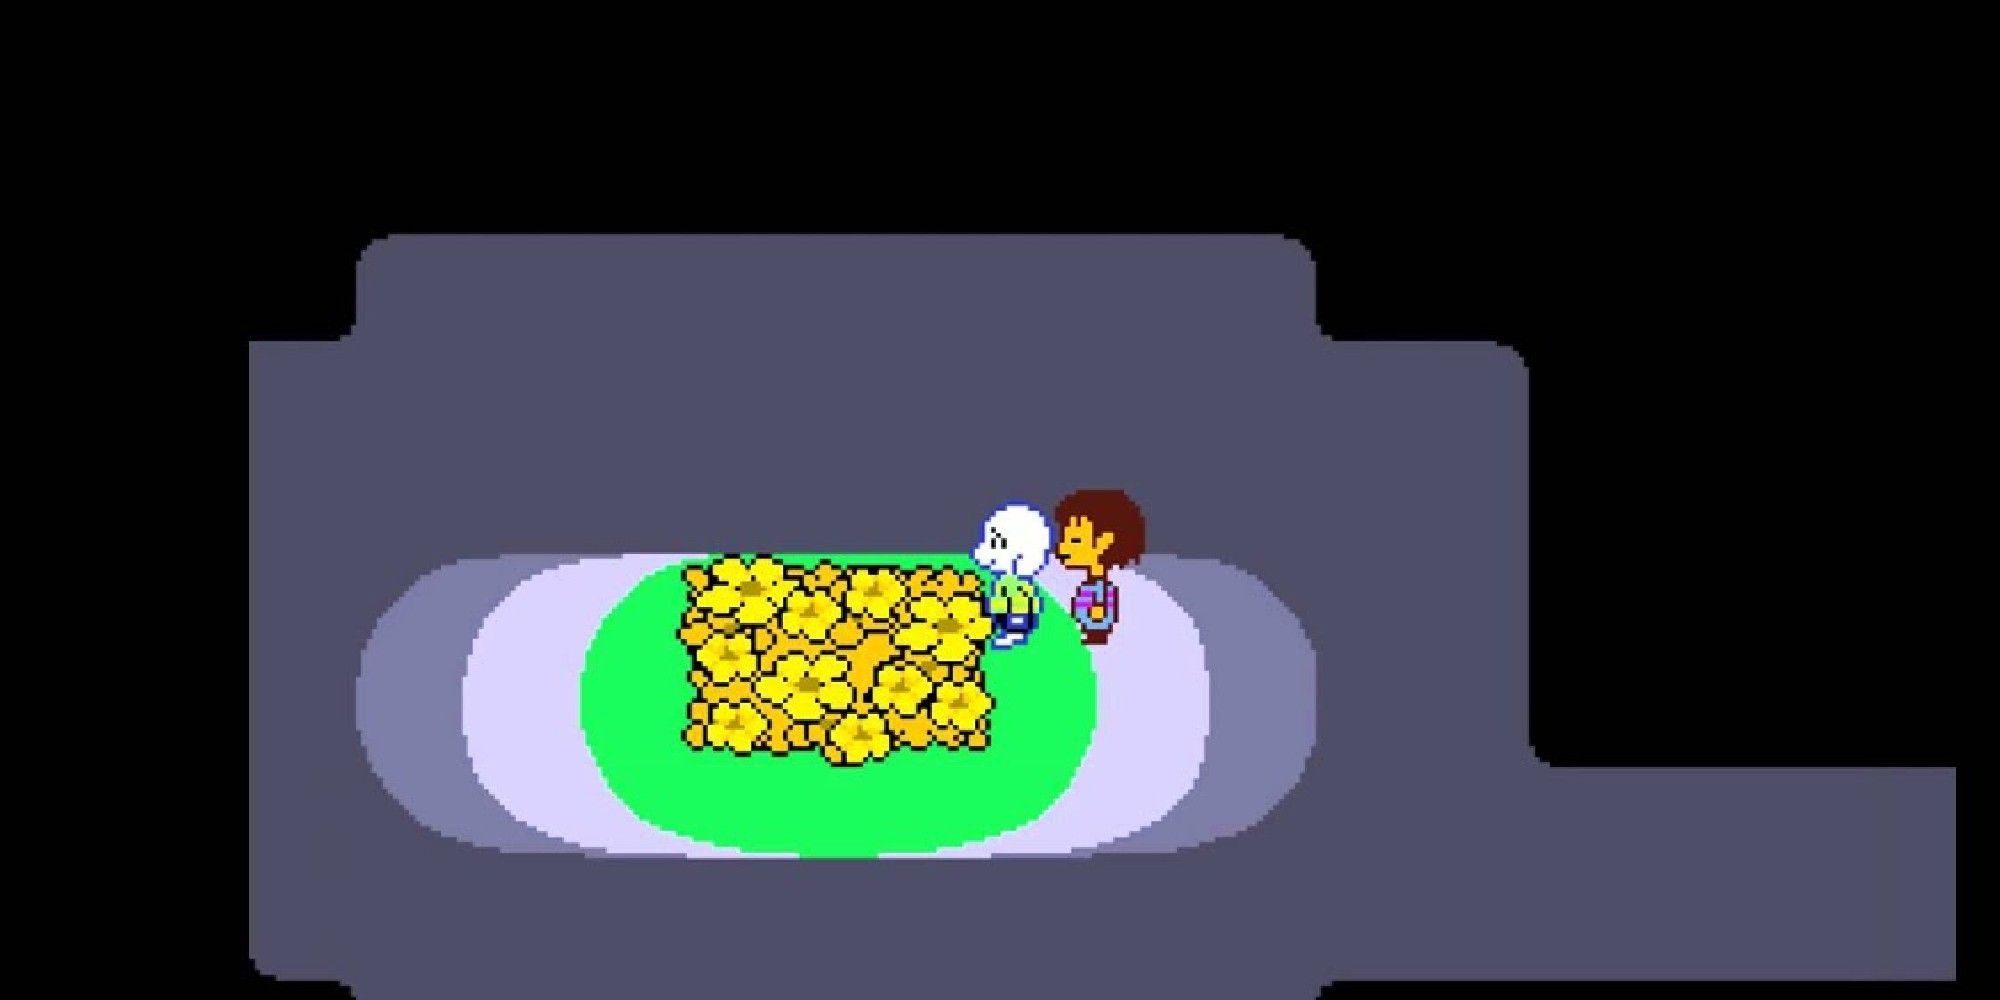 Undertale: The One That Can't Be Saved